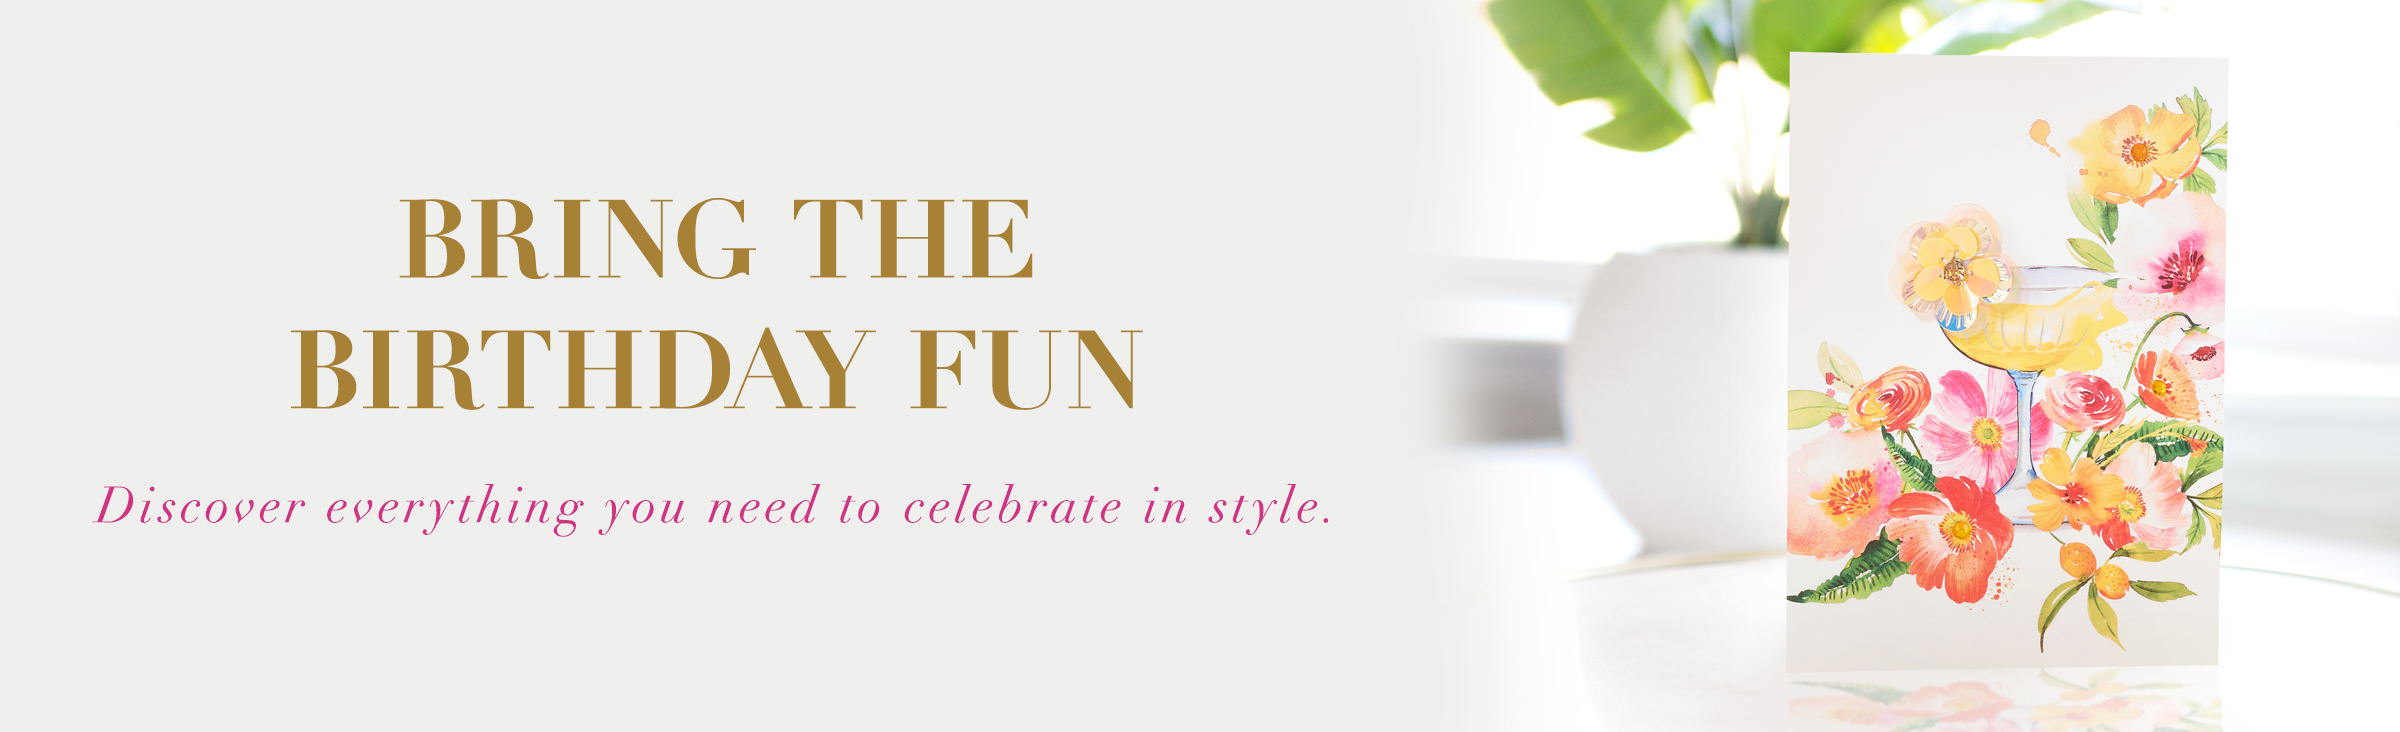 Bring the Birthday Fun Discover everything you need to celebrate in style